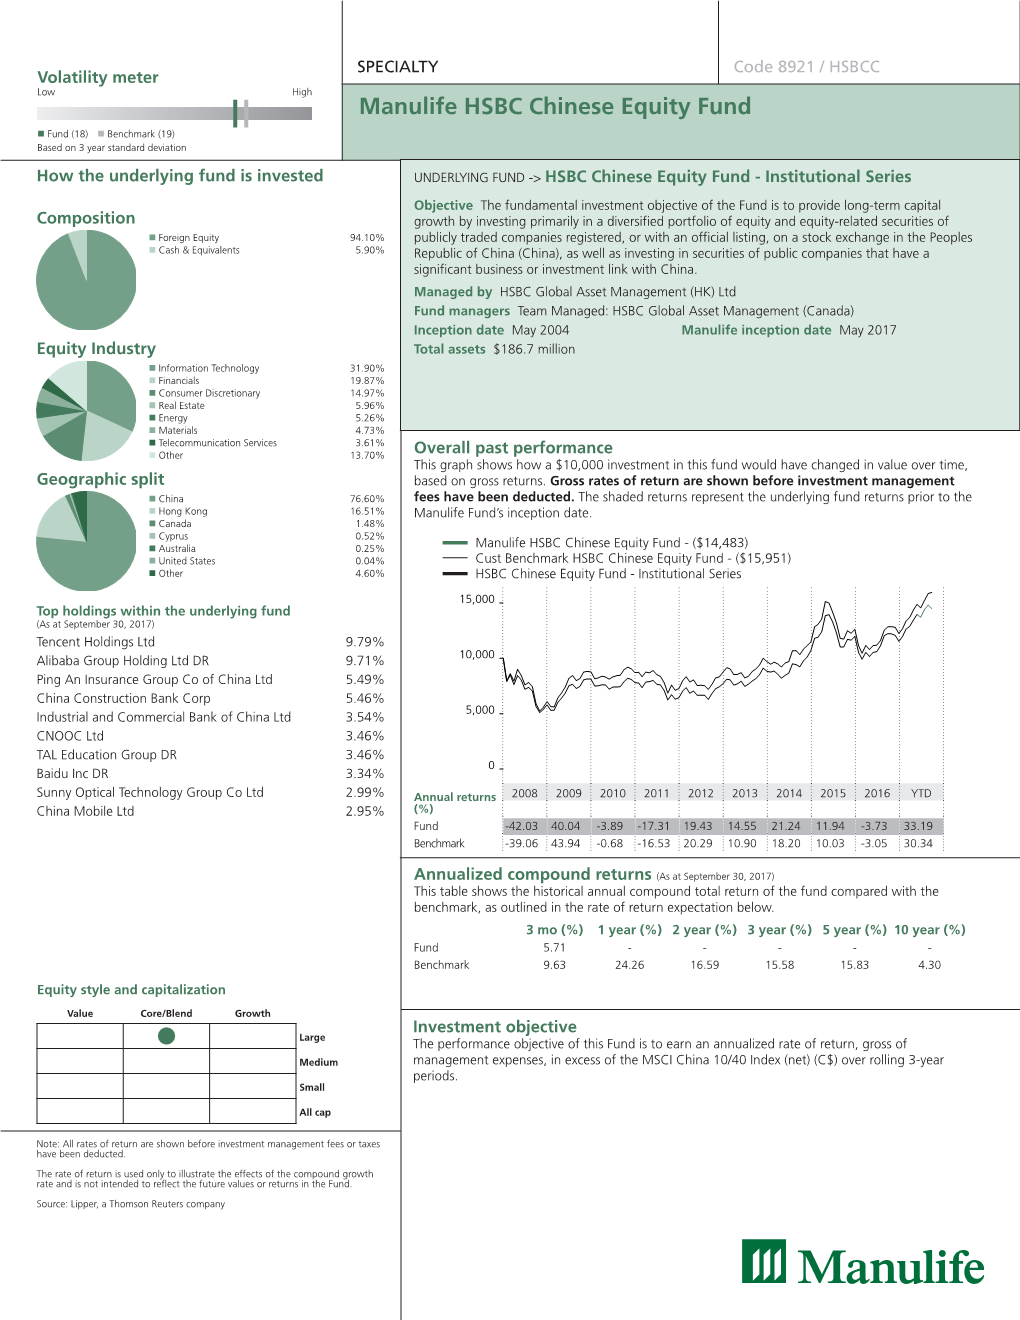 Manulife HSBC Chinese Equity Fund